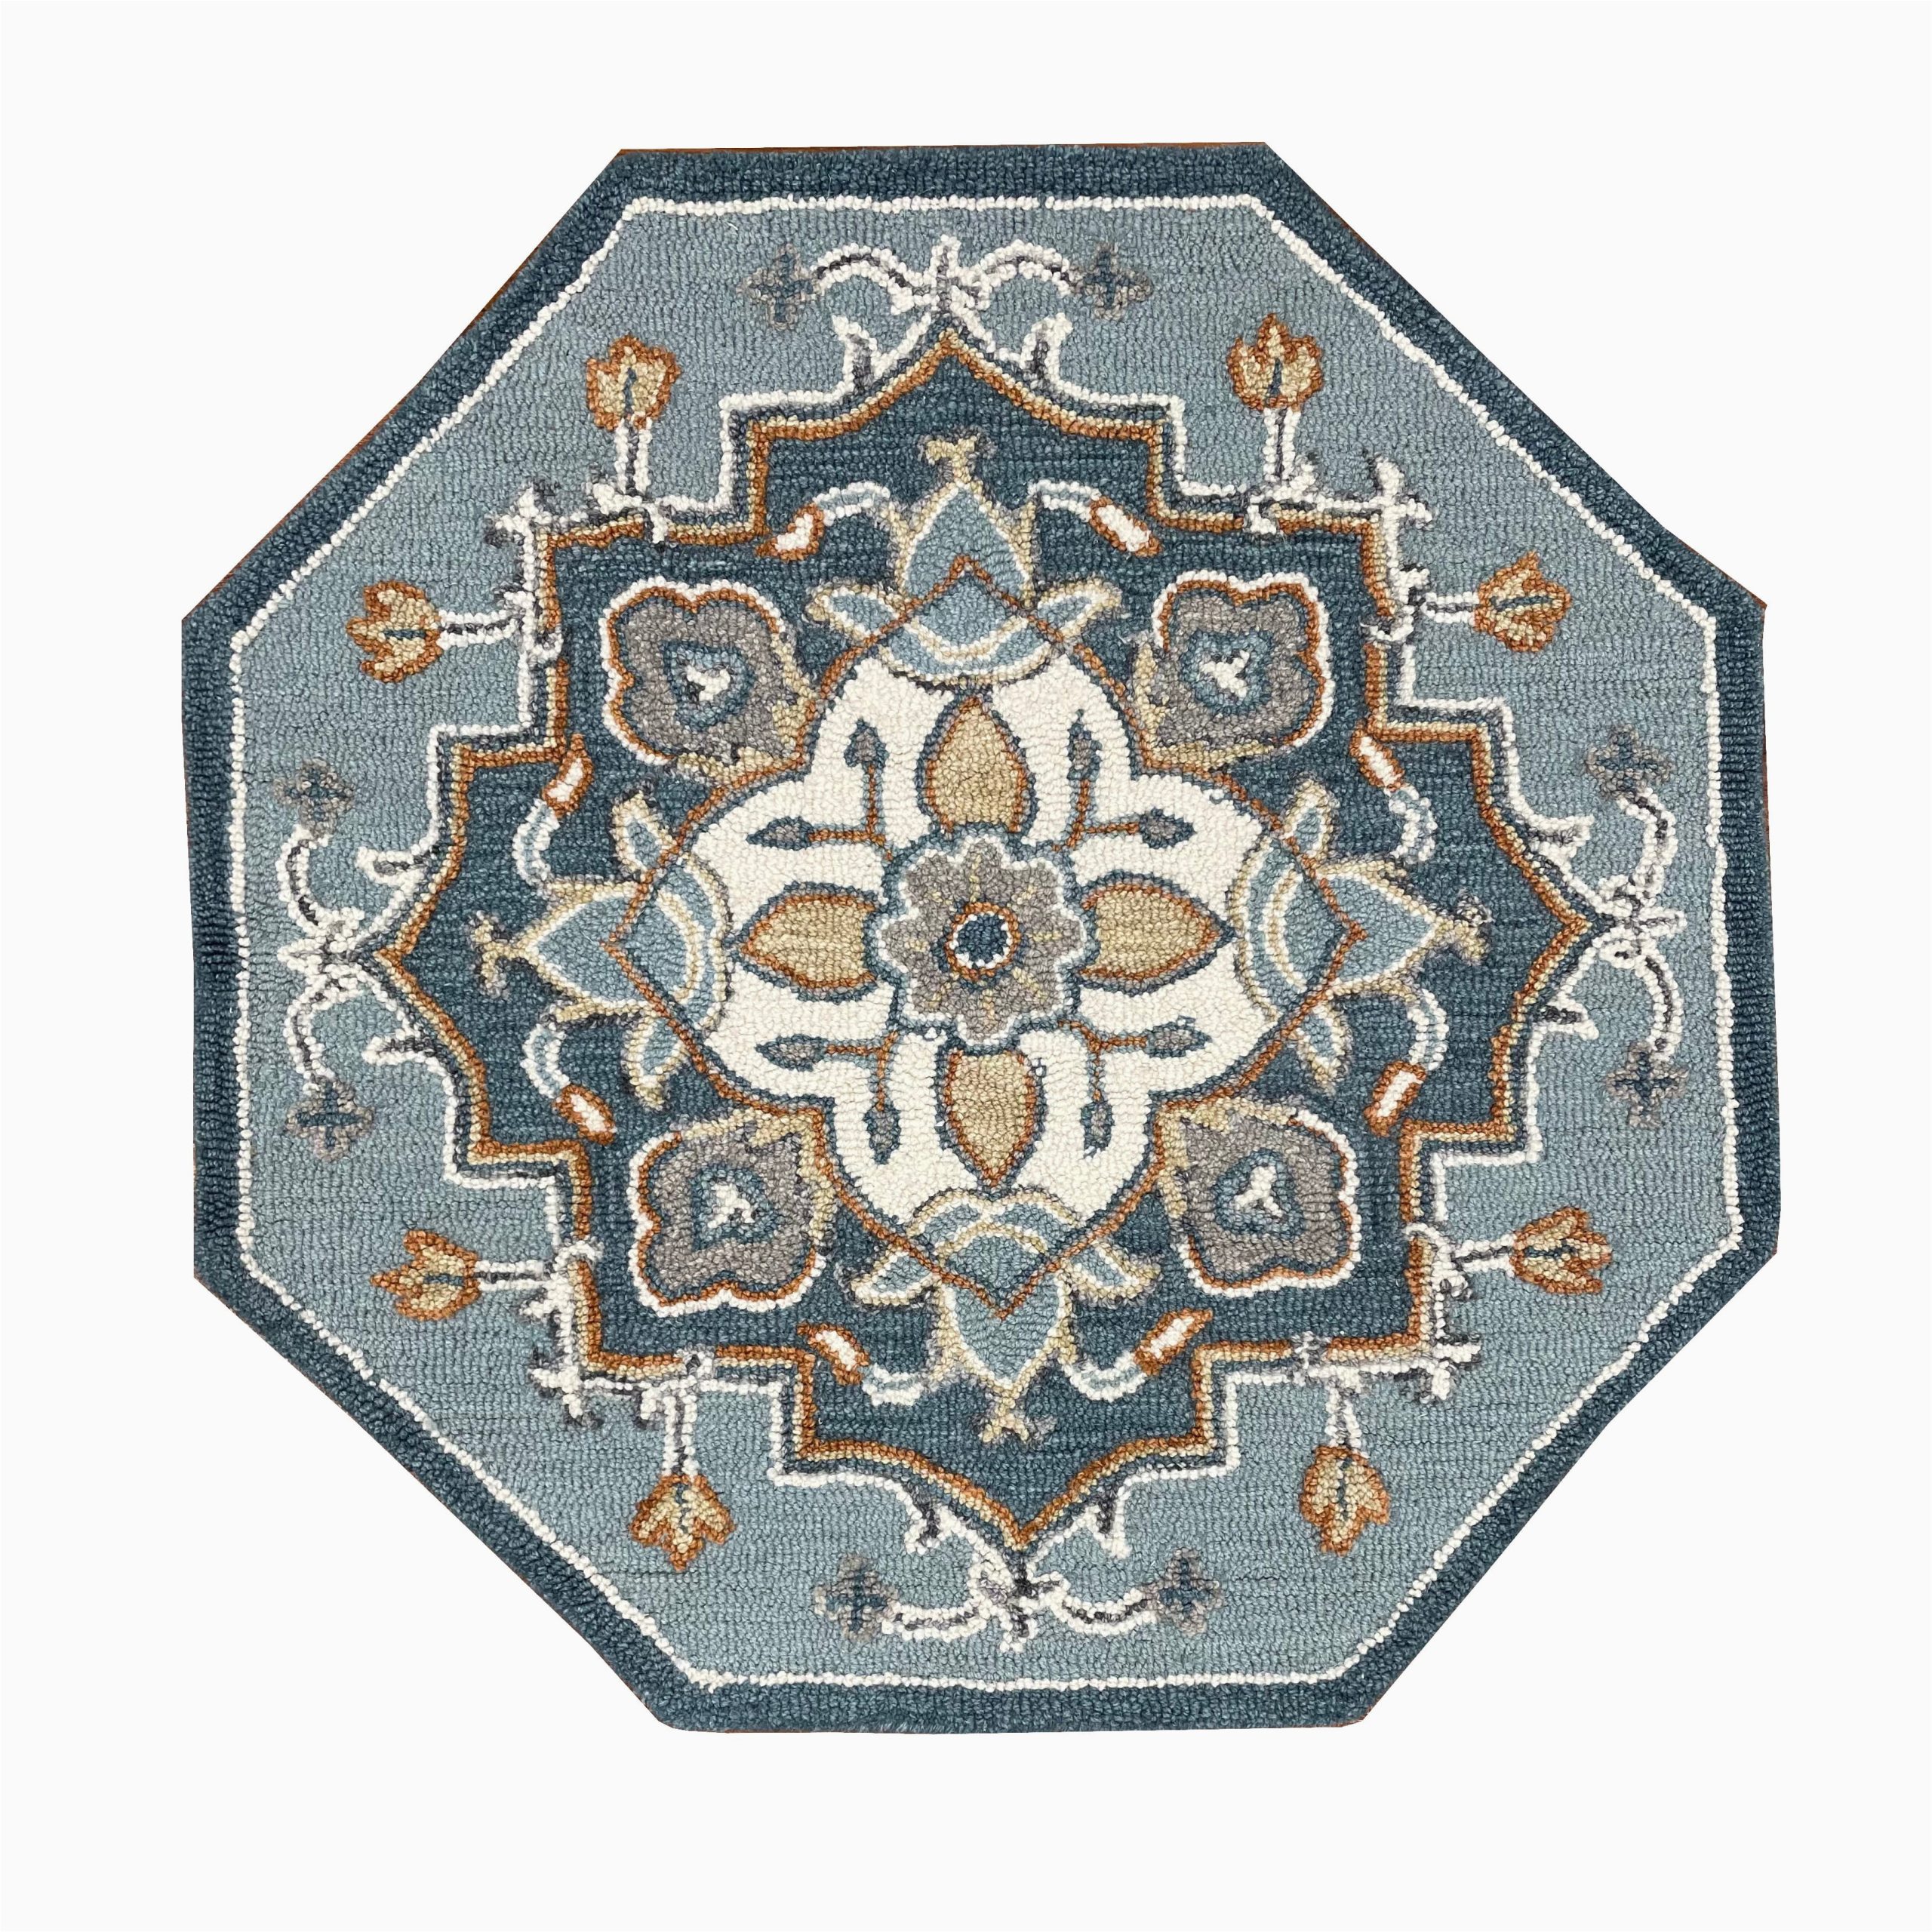 8 Foot Octagon area Rug Ox Bay Traditional Floral Medallion area Rug, Teal Blue, 3 Ft. Octagon